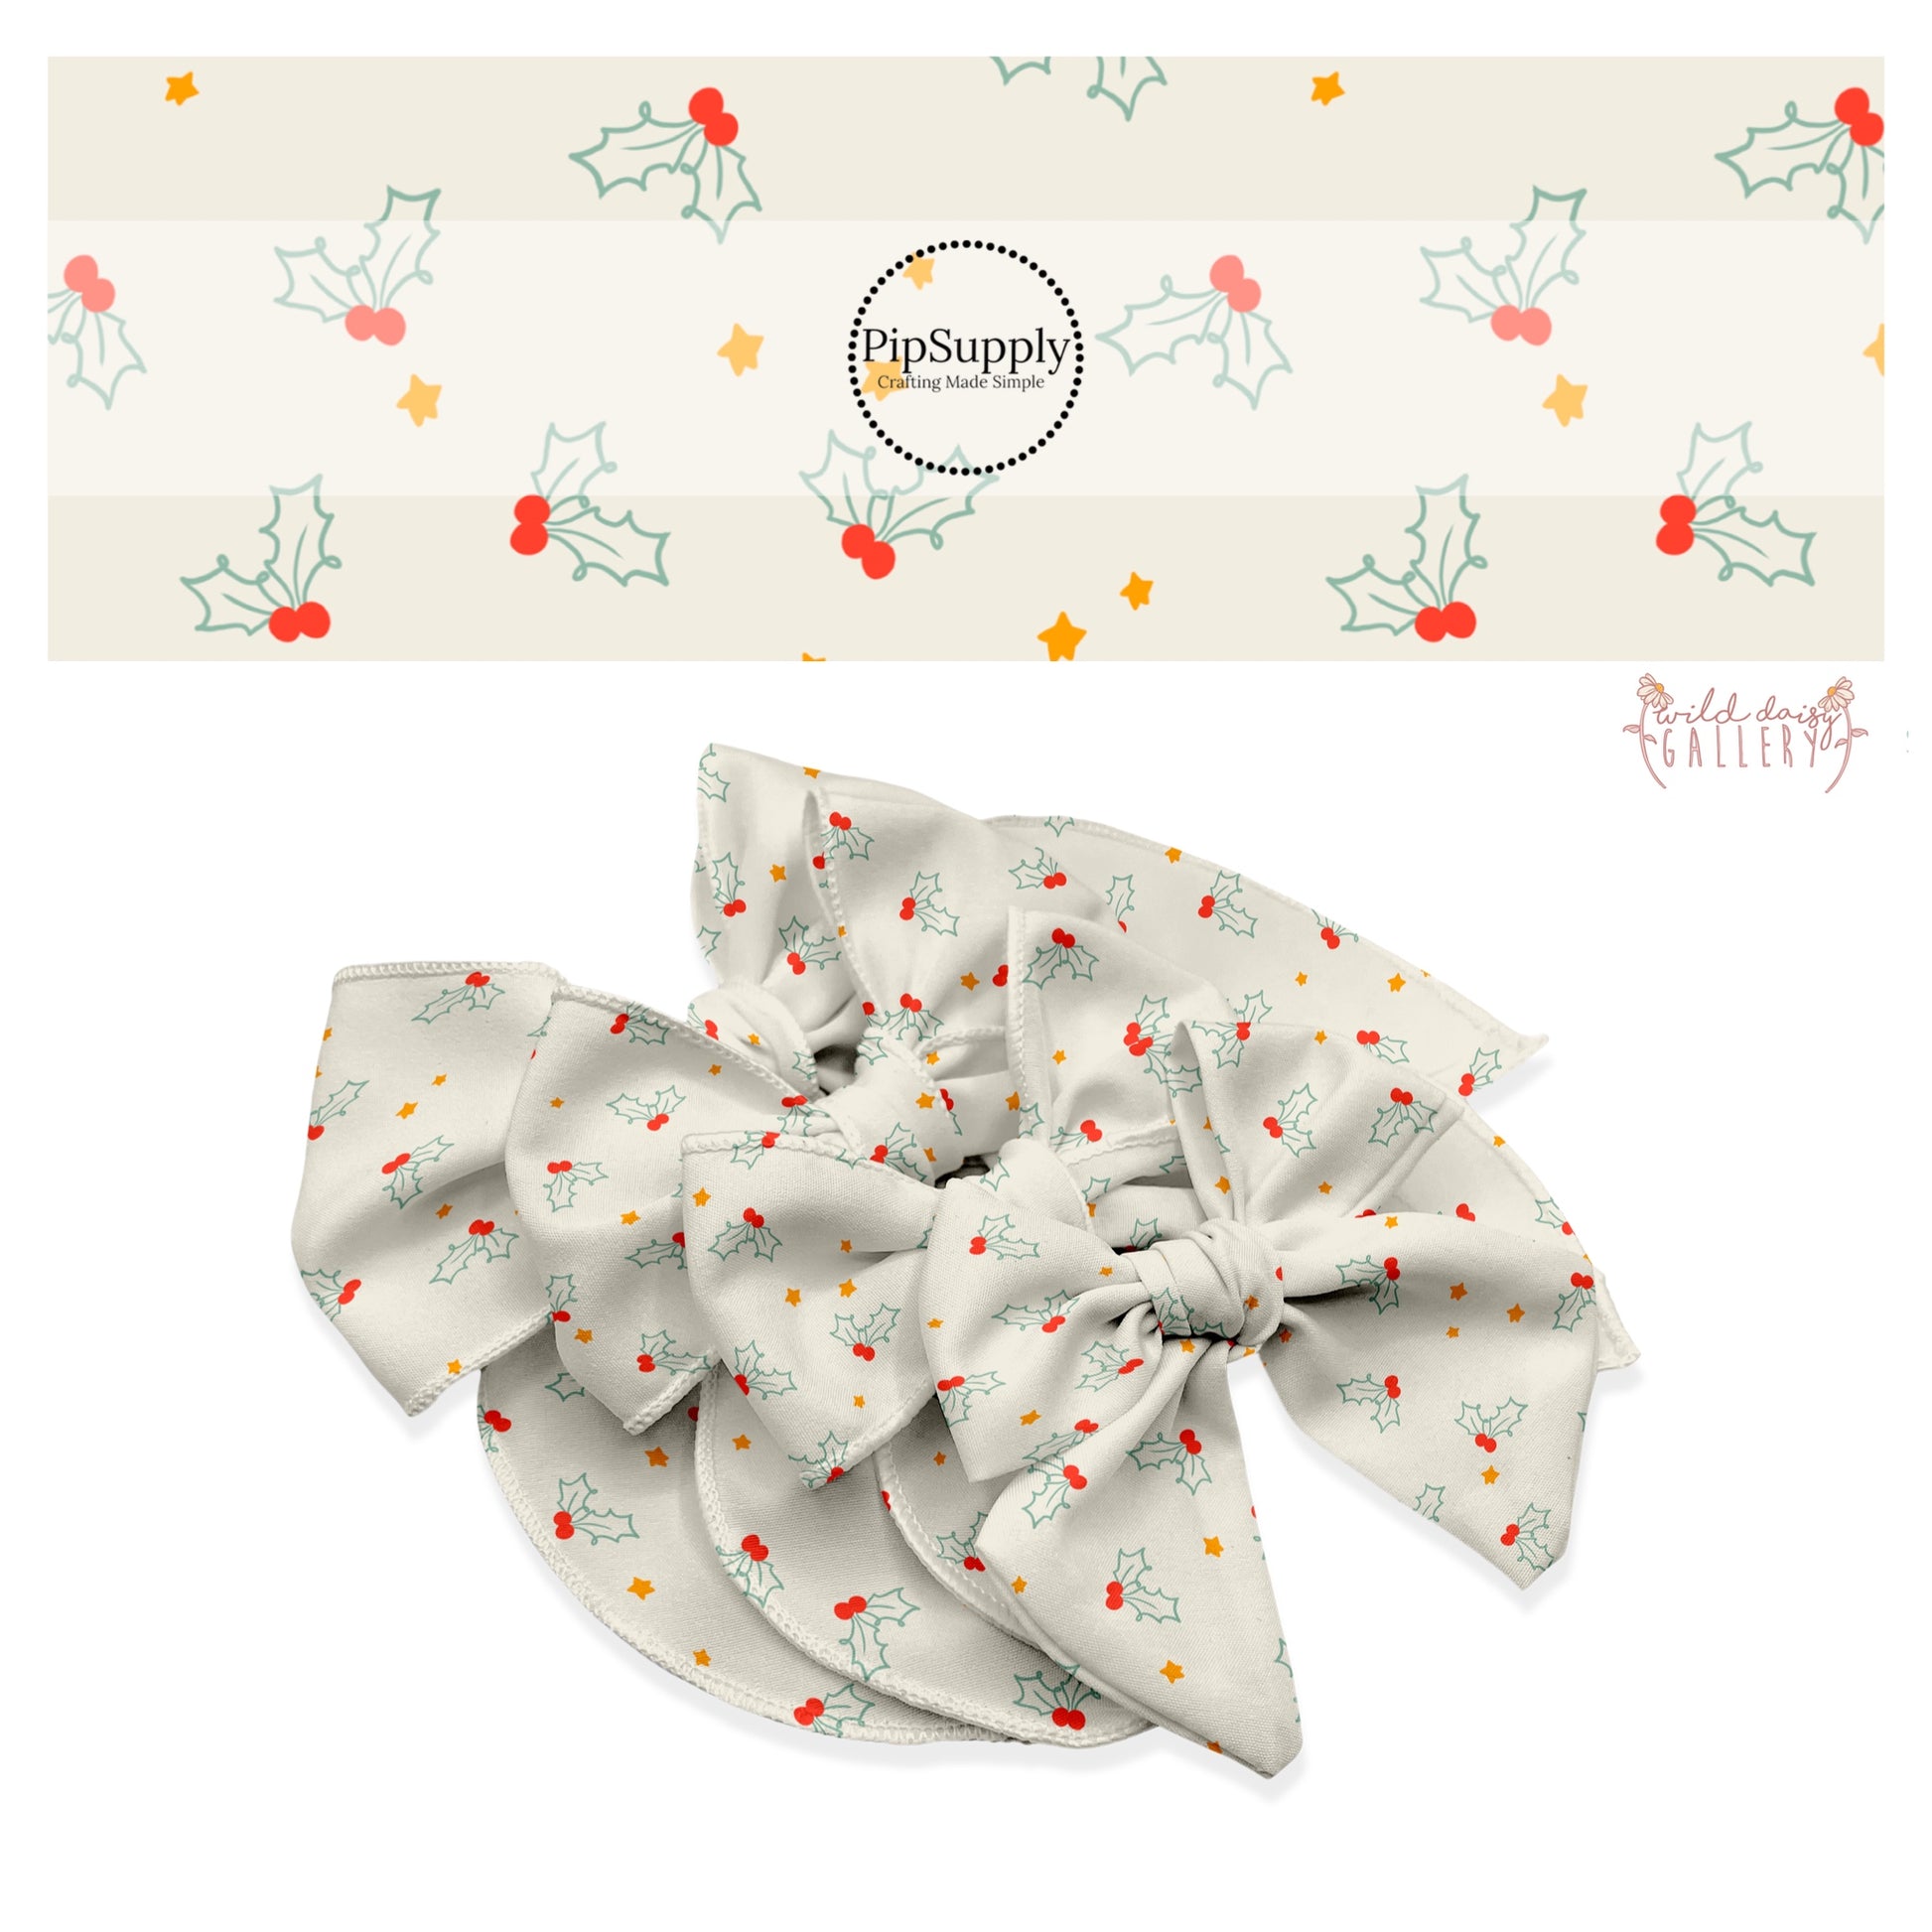 Holly leaves with berries and stars on cream hair bow strips